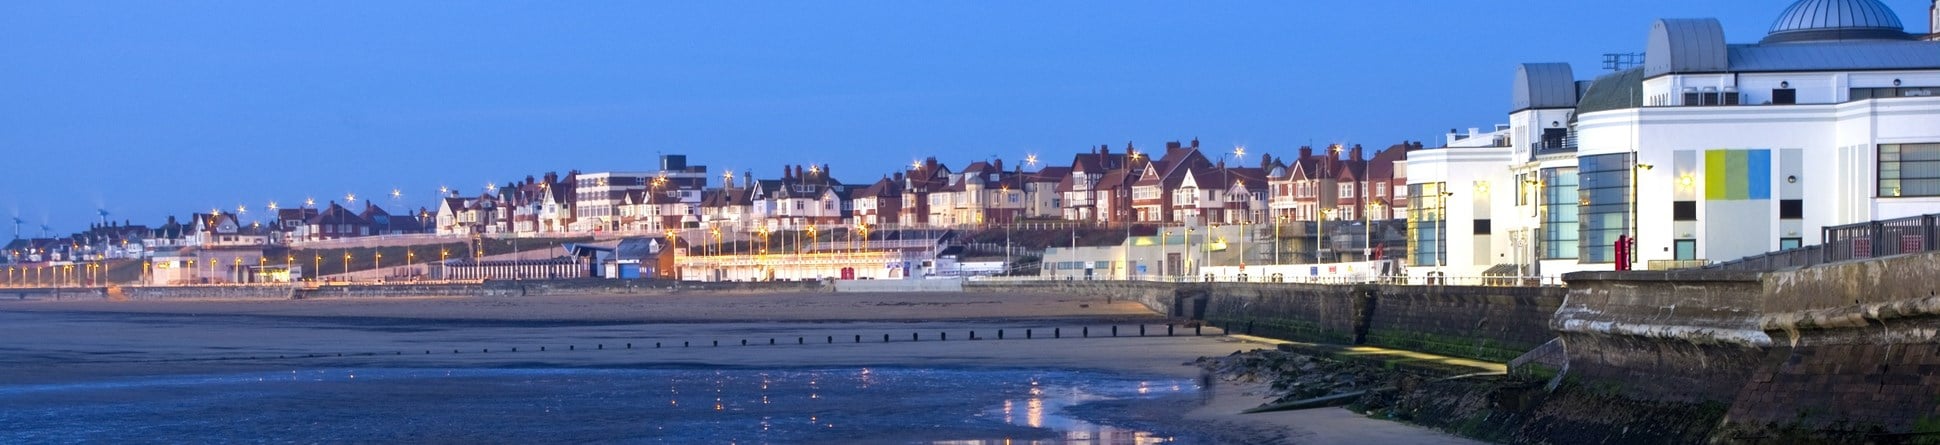 Bridlington Spa, East Riding in early evening.